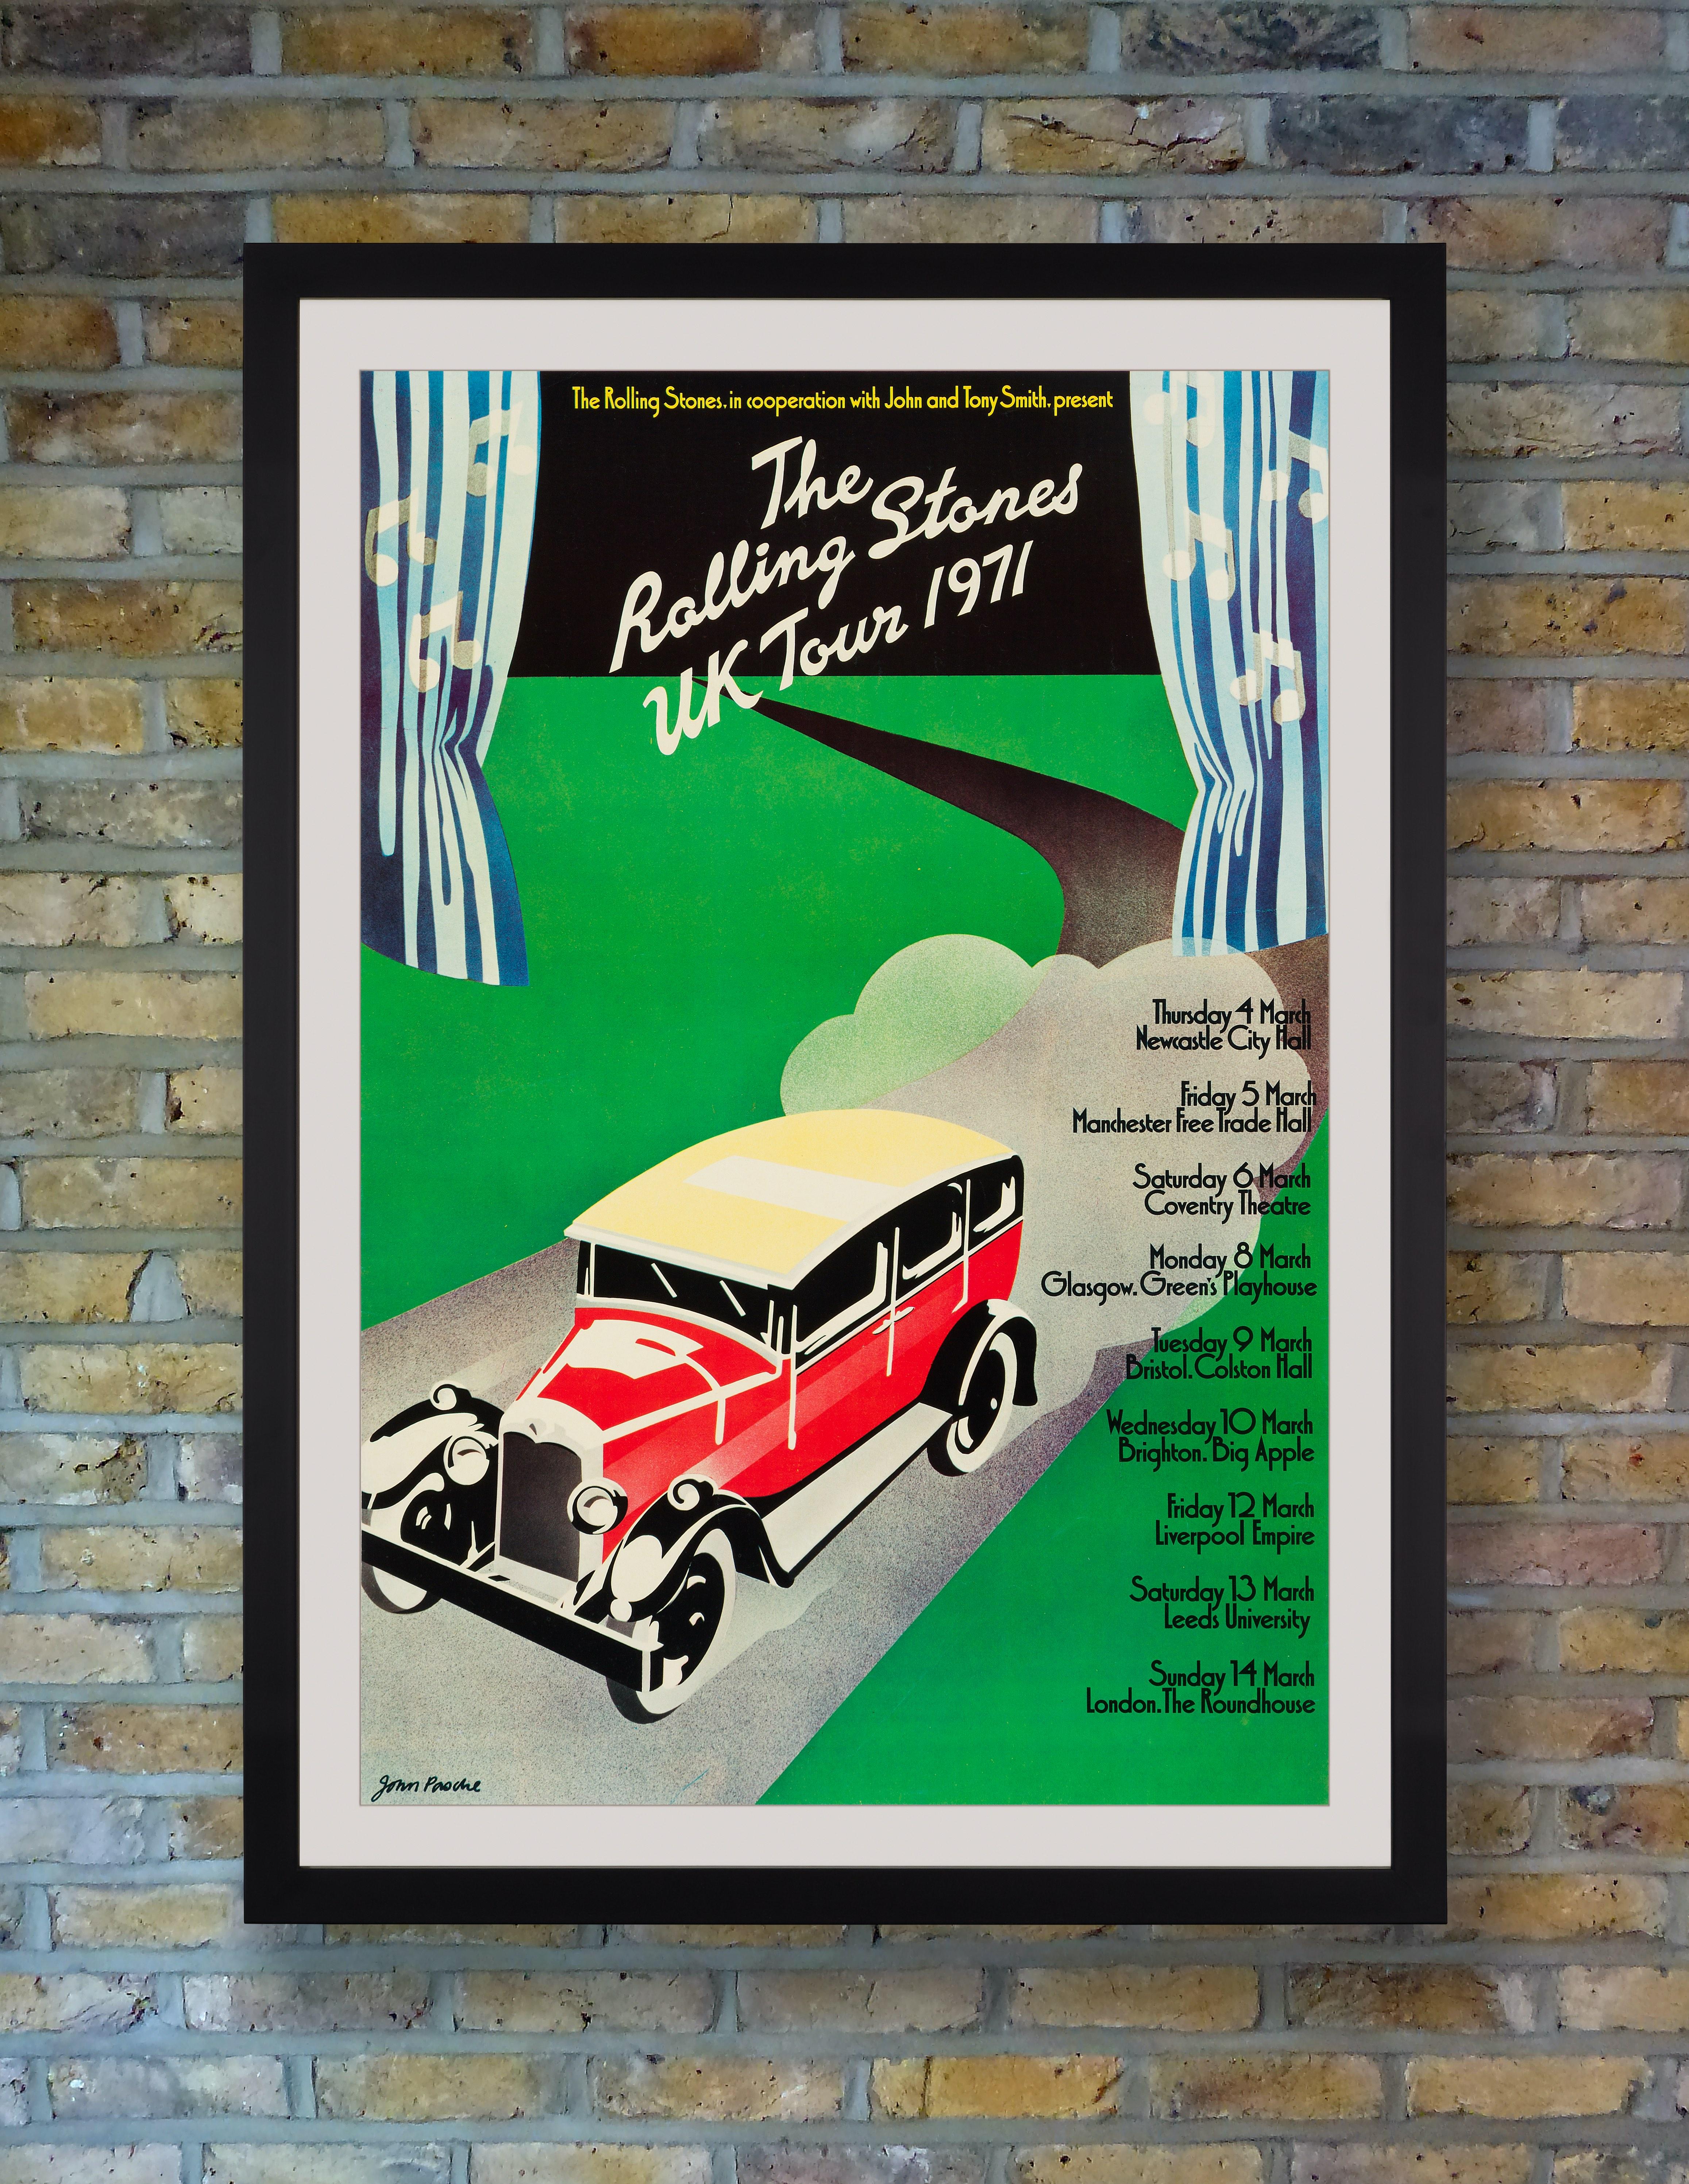 A rare original tour poster printed to promote the Rolling Stones 1971 UK Tour, otherwise known as the 